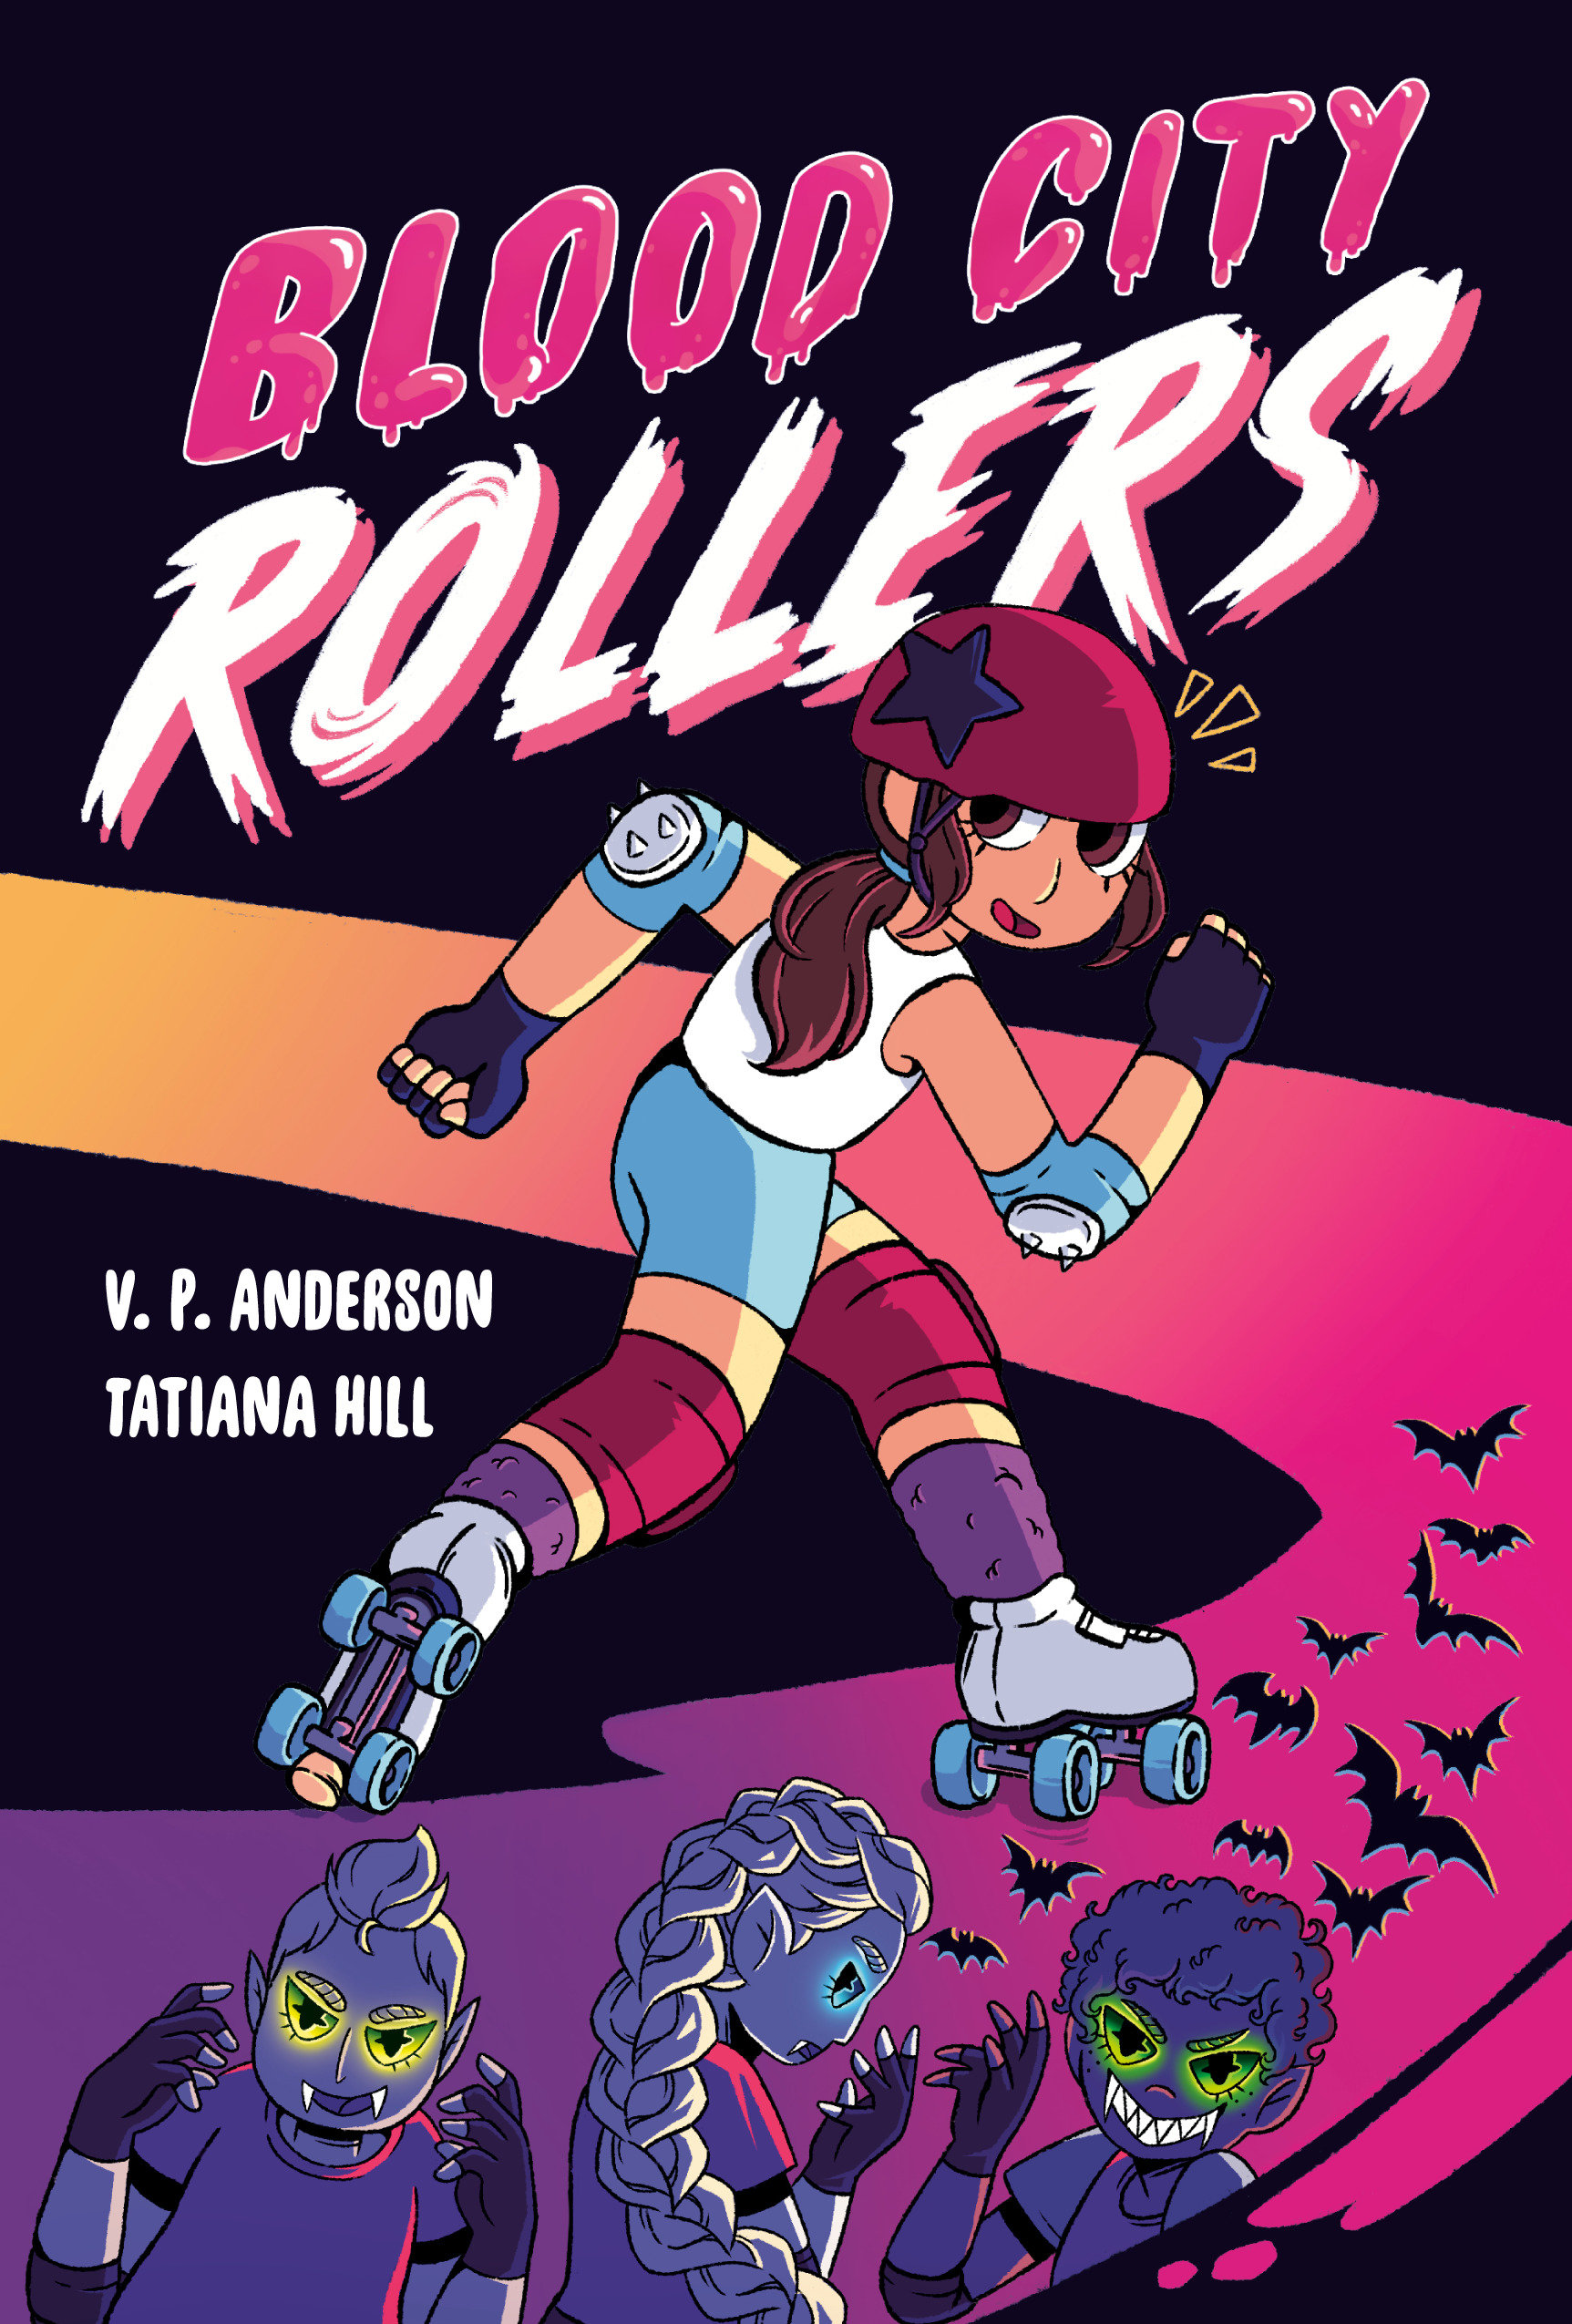 Blood City Rollers Graphic Novel Volume 1